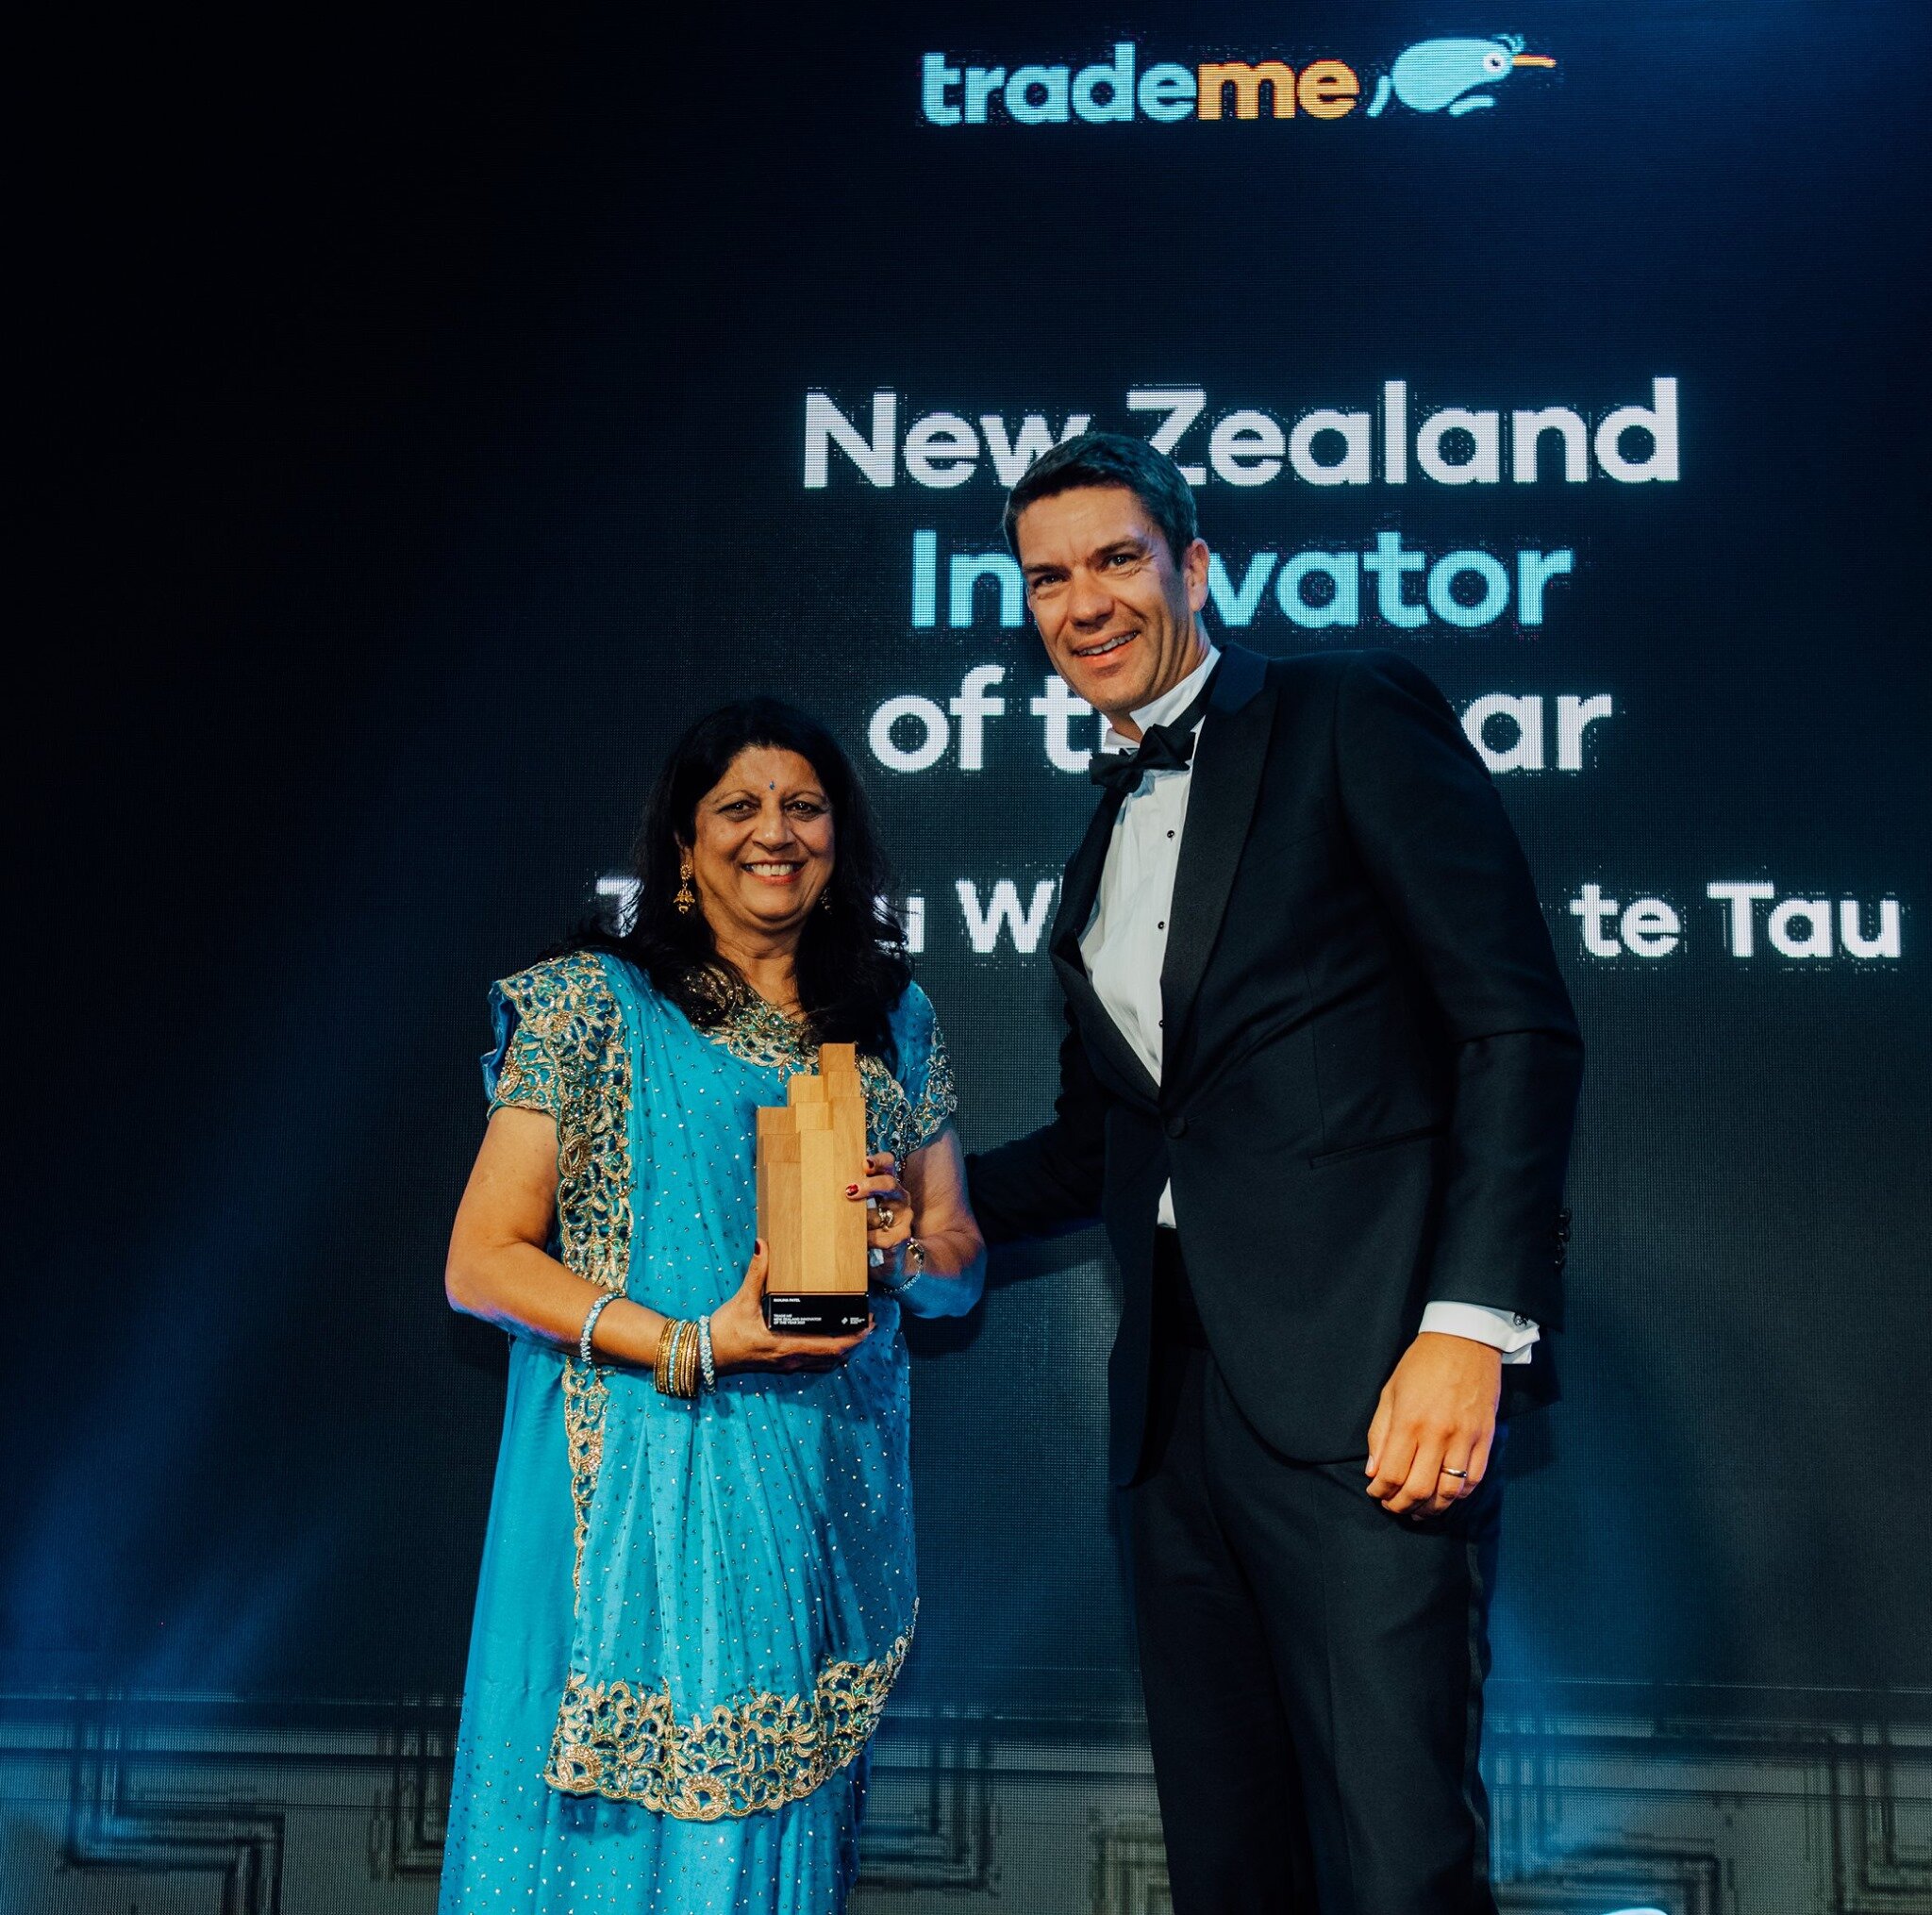 Who owns trademe in new zealand?